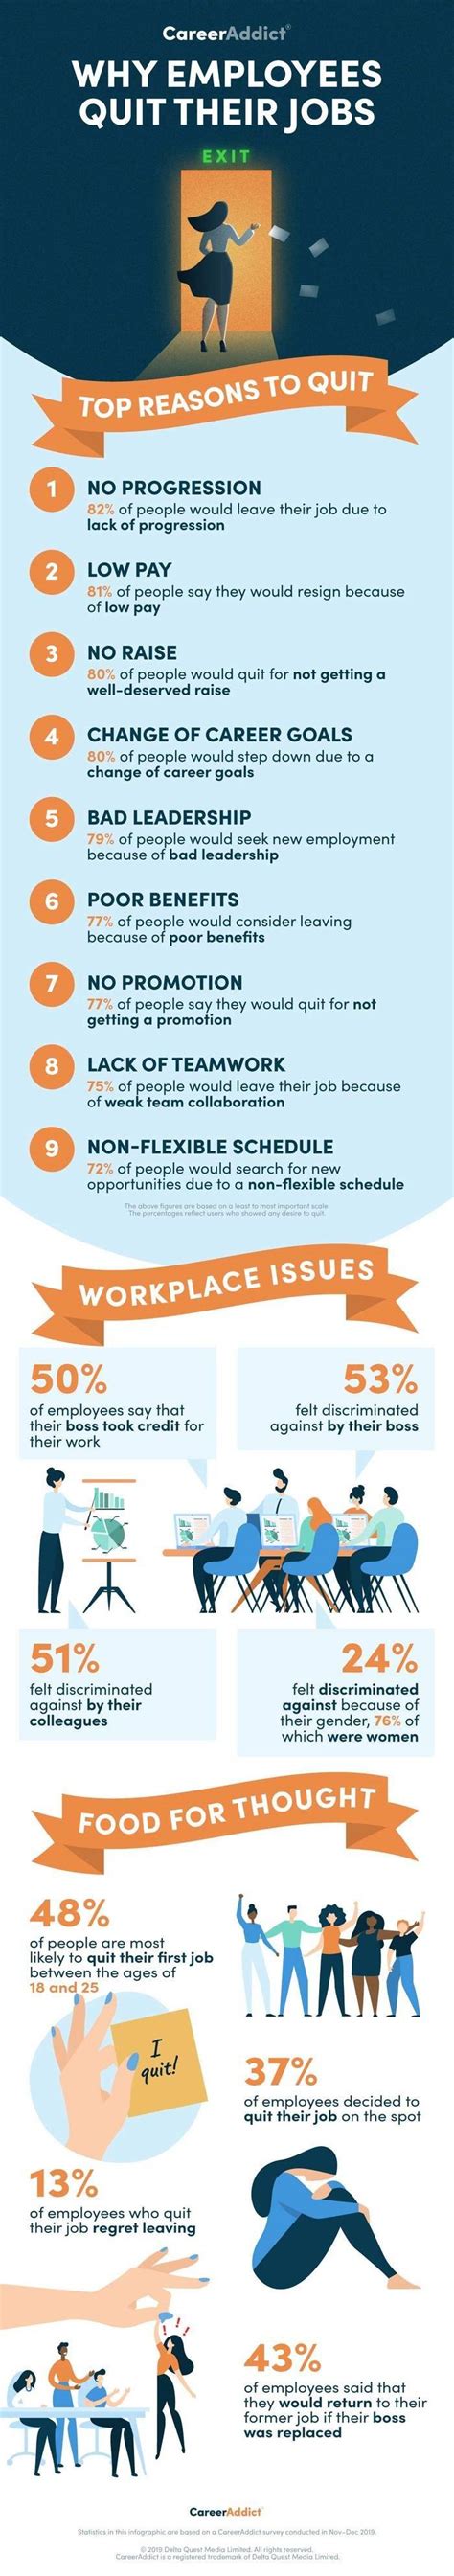 Common Reasons Why Employees Quit Their Jobs